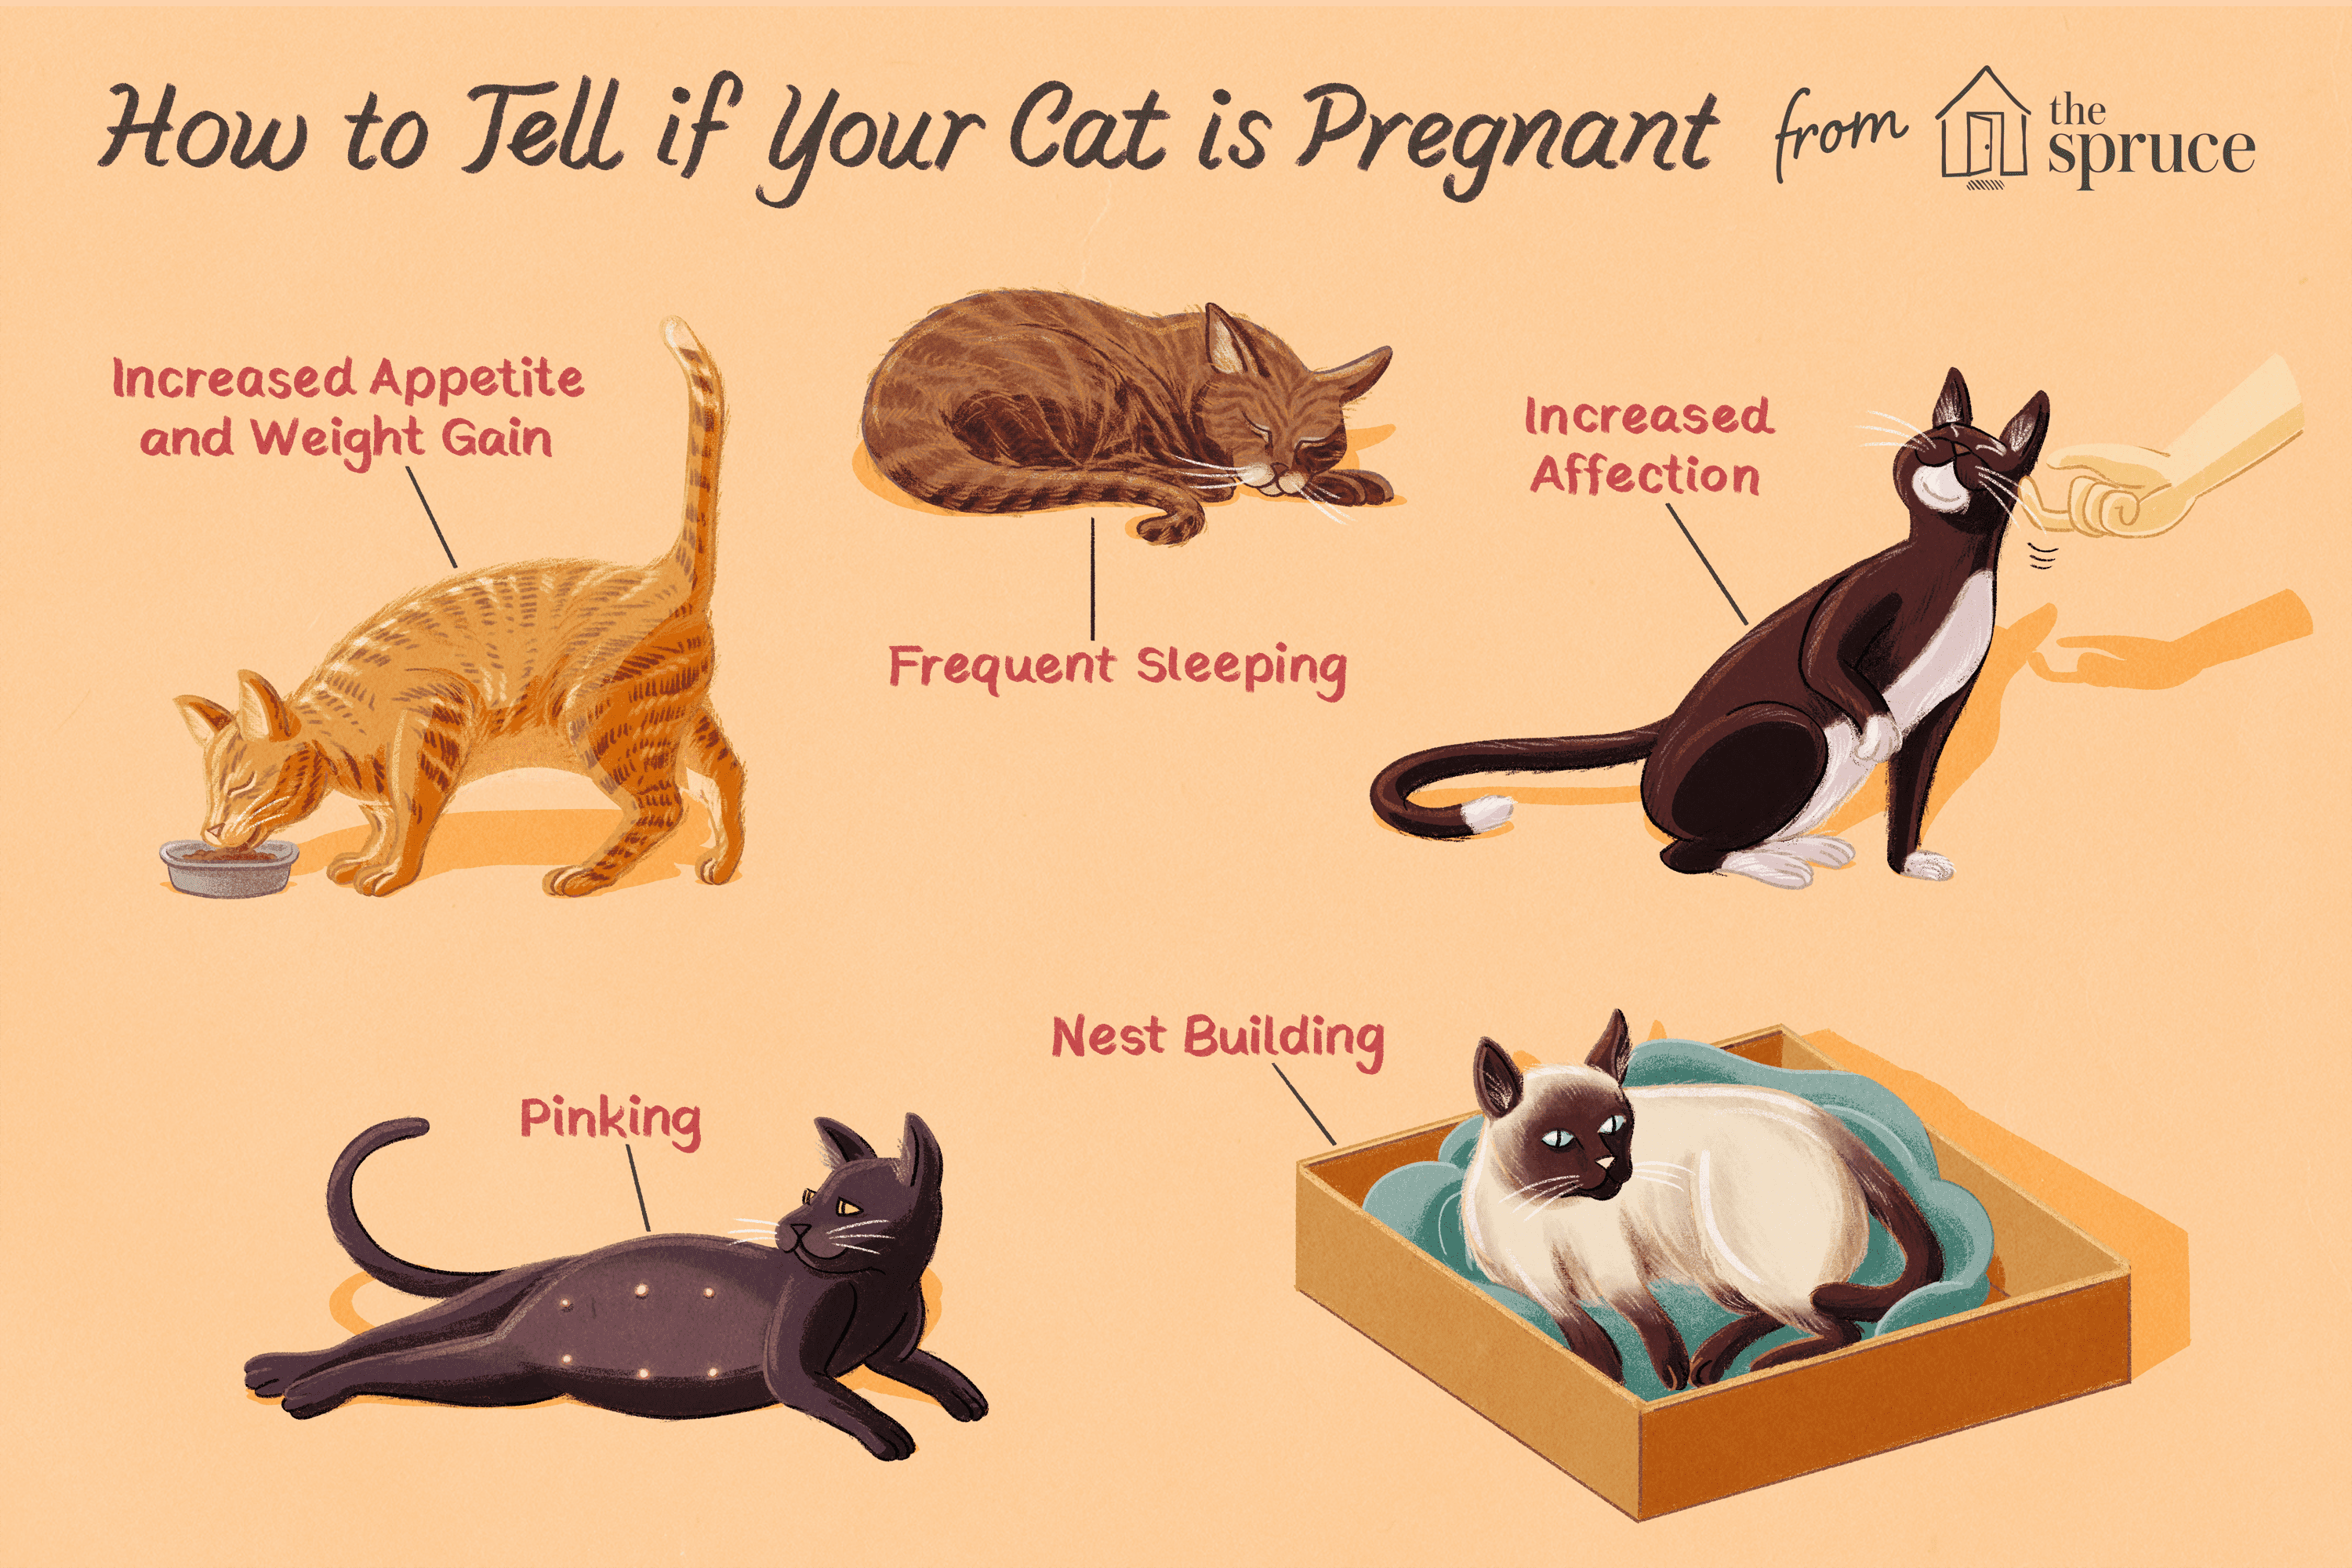 how to tell if your cat is pregnant illustration